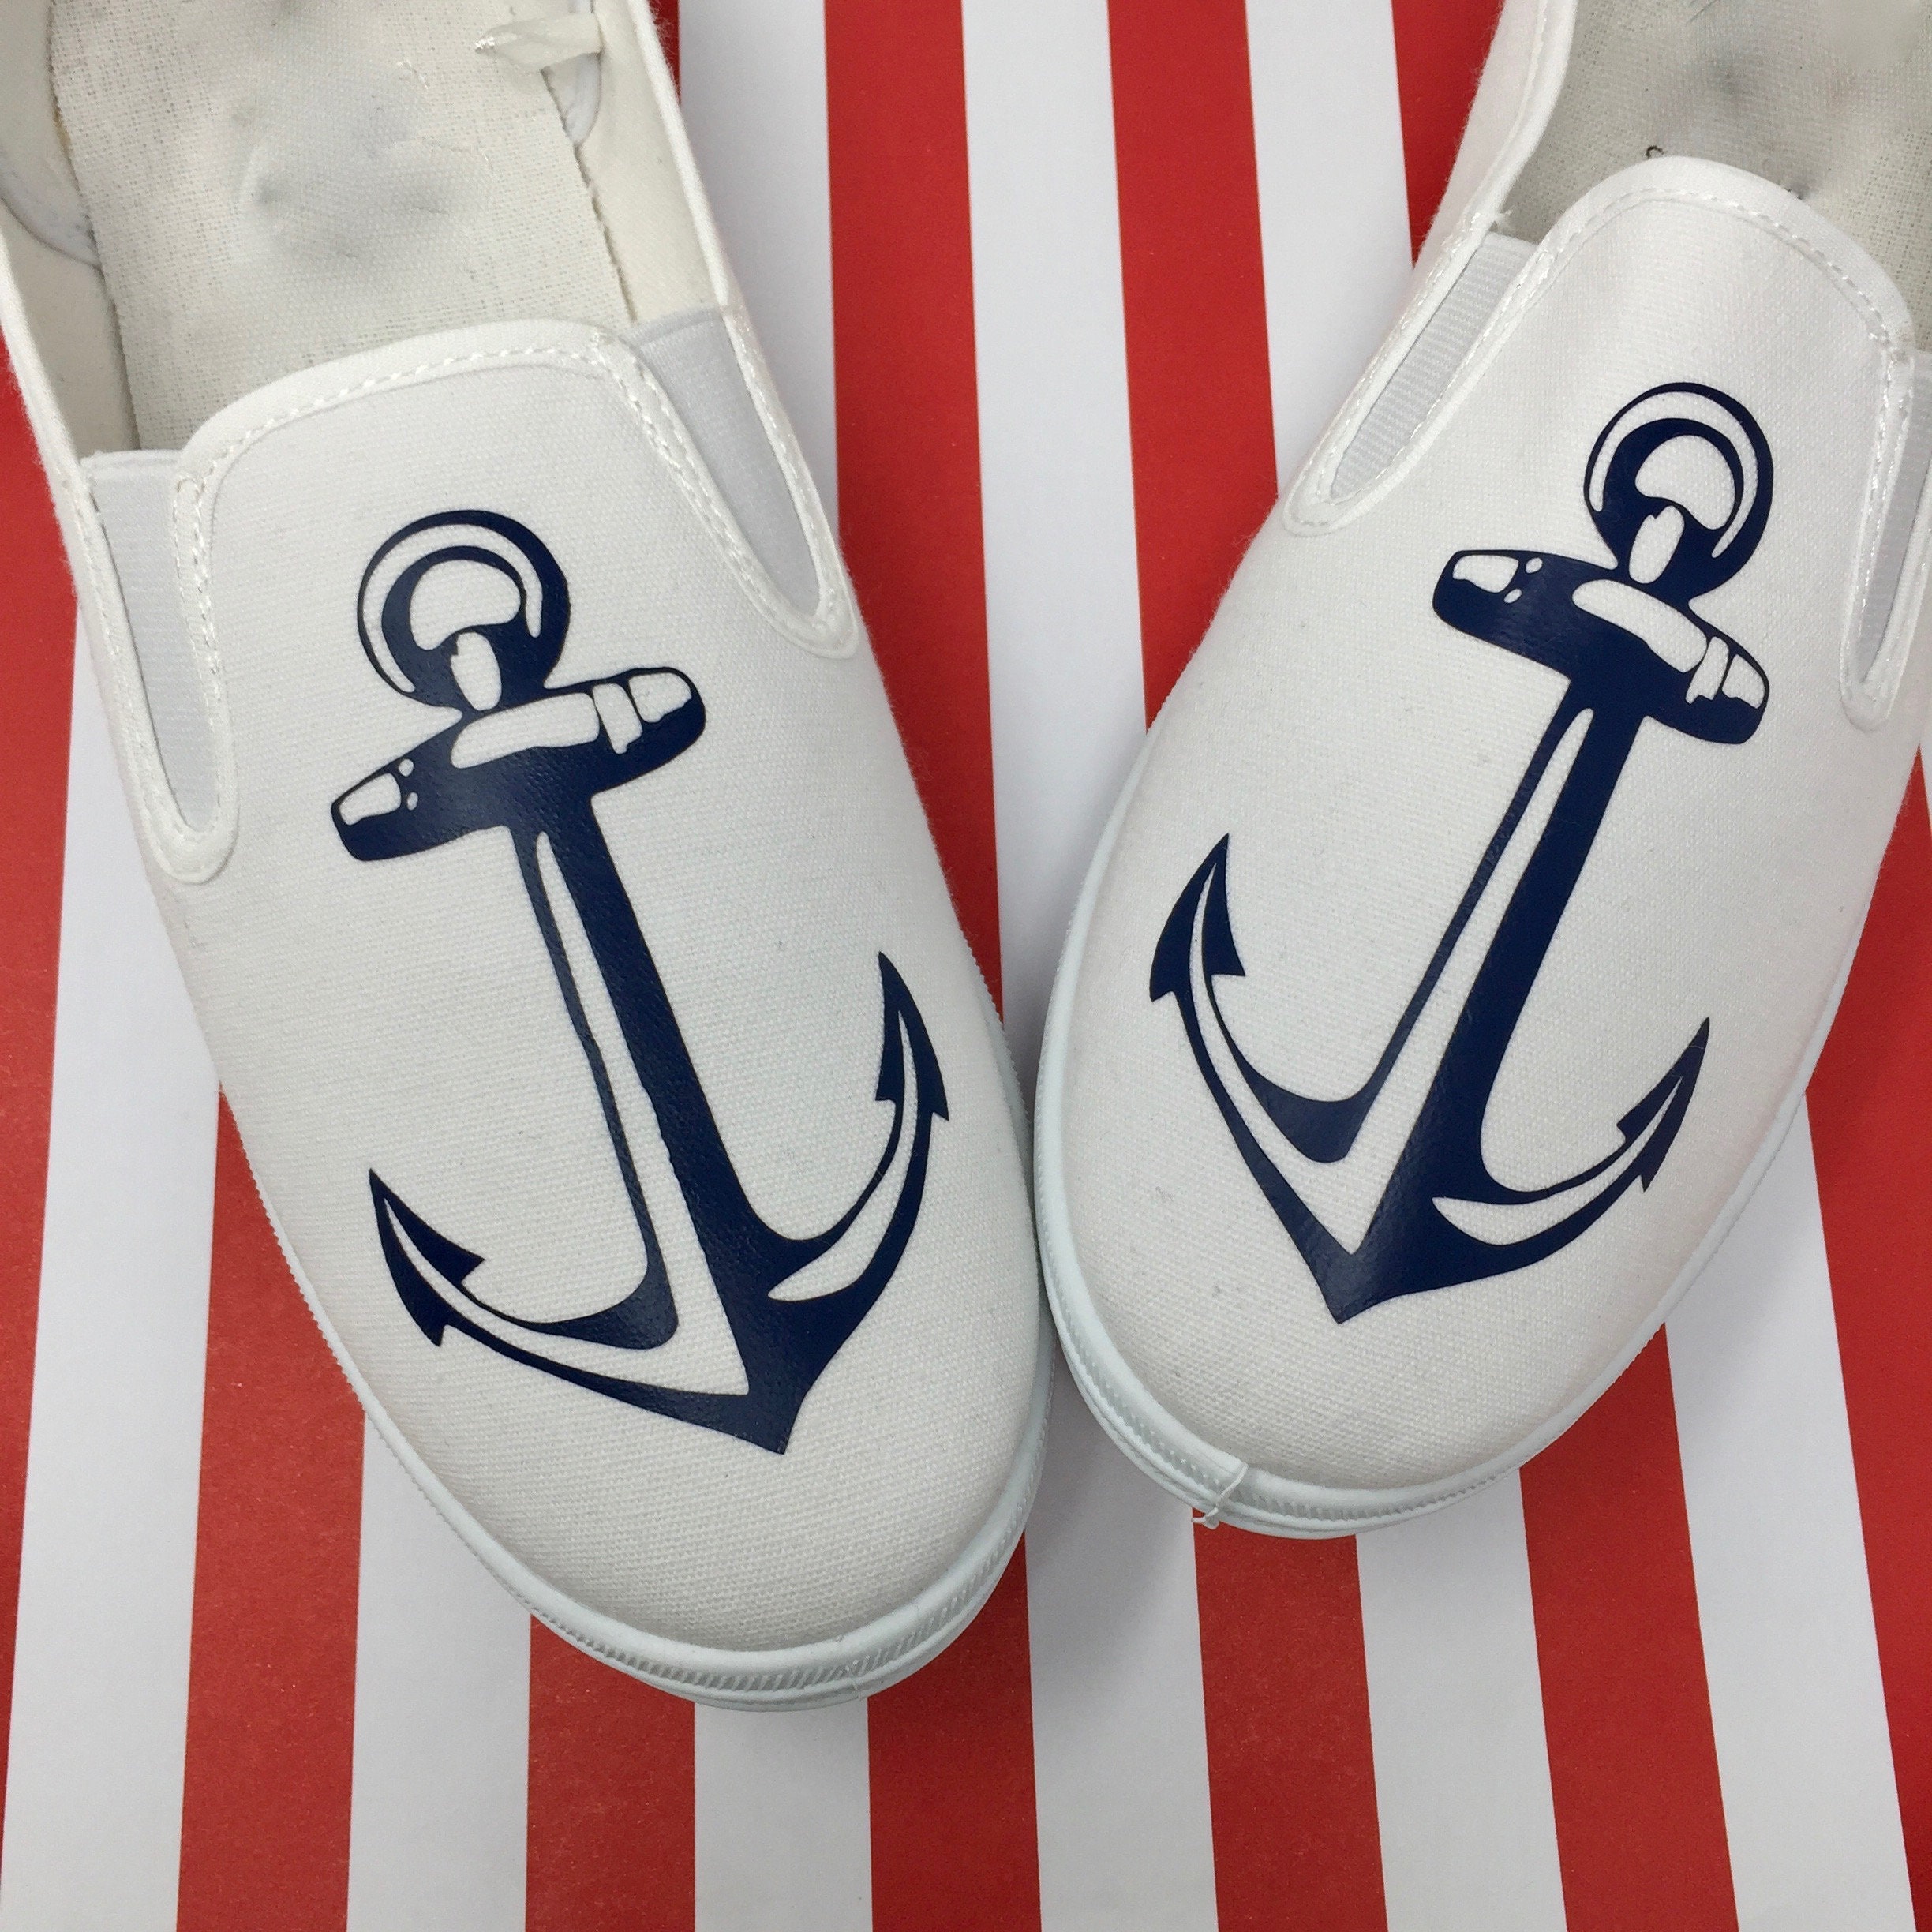 Anchor Shoes. Cruise Shoes. Boat Anchor Shoes. | Etsy